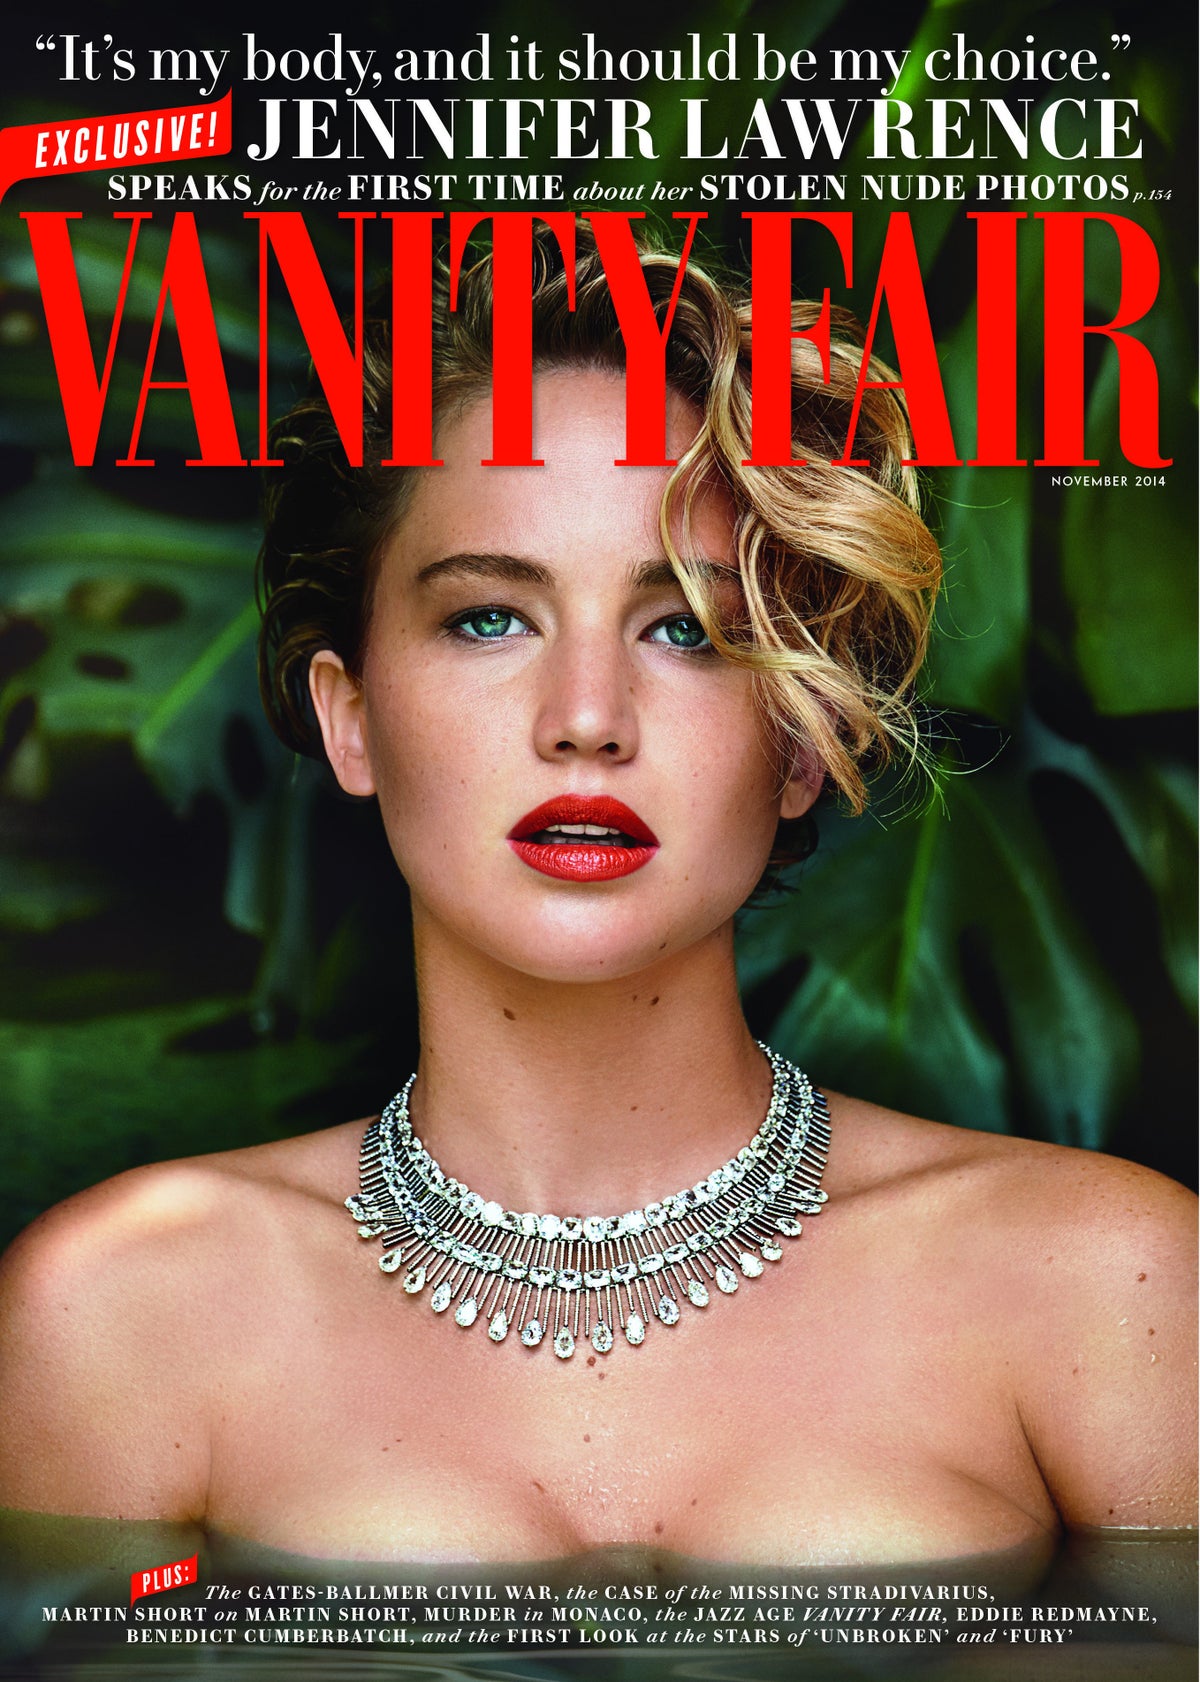 Jennifer Lawrence in Vanity Fair: The publication of nude photos a sex  crime, not a scandal.